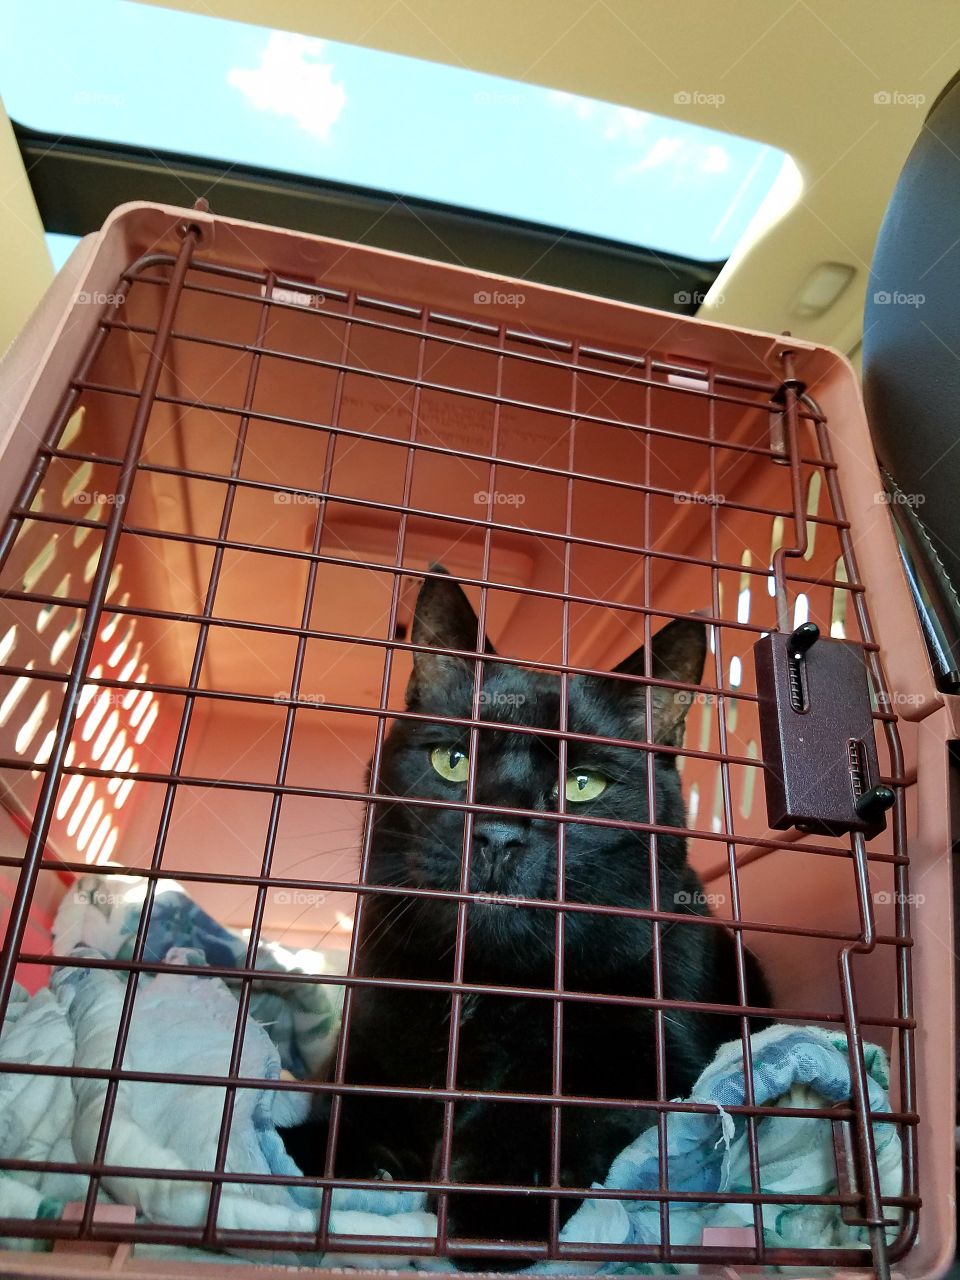 Riding home in carry cage from vet appointment.